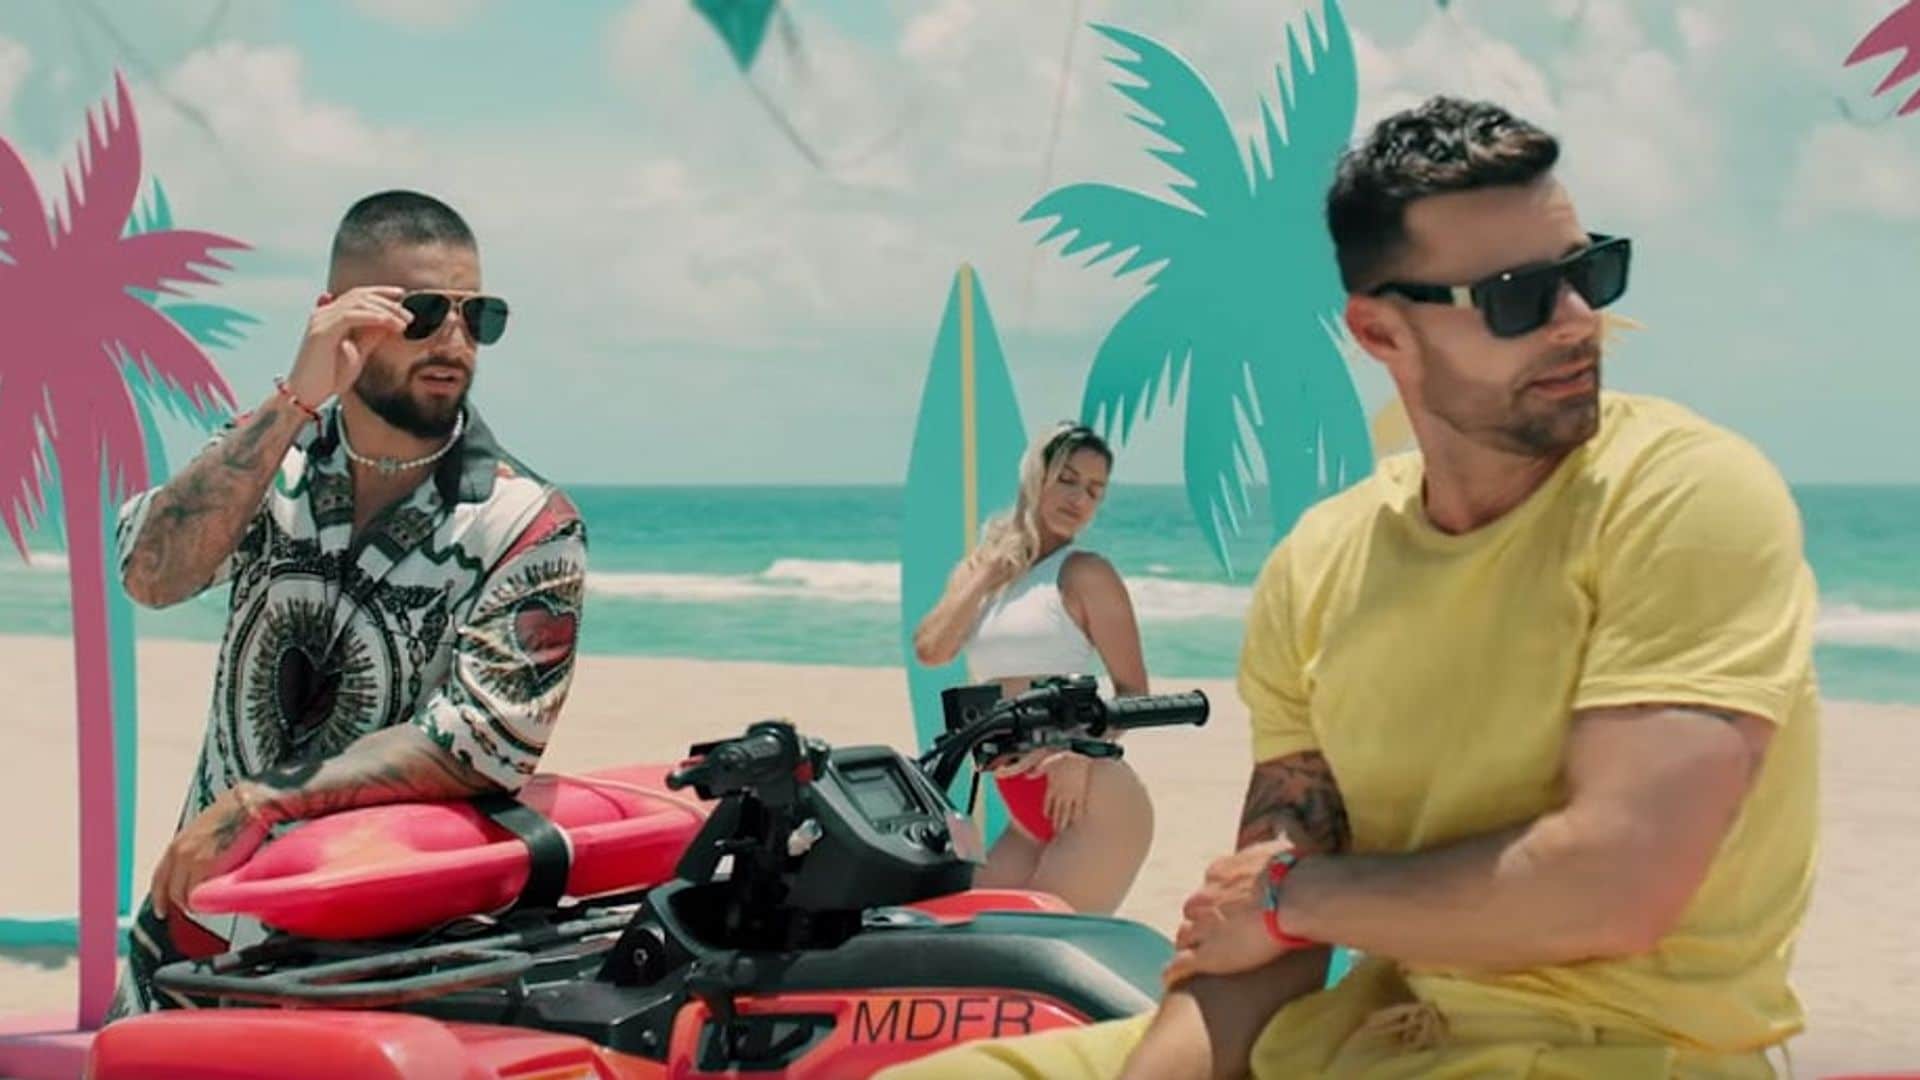 Muy Caliente! Maluma and Ricky Martin bring the heat with 'No Se Me Quita' video